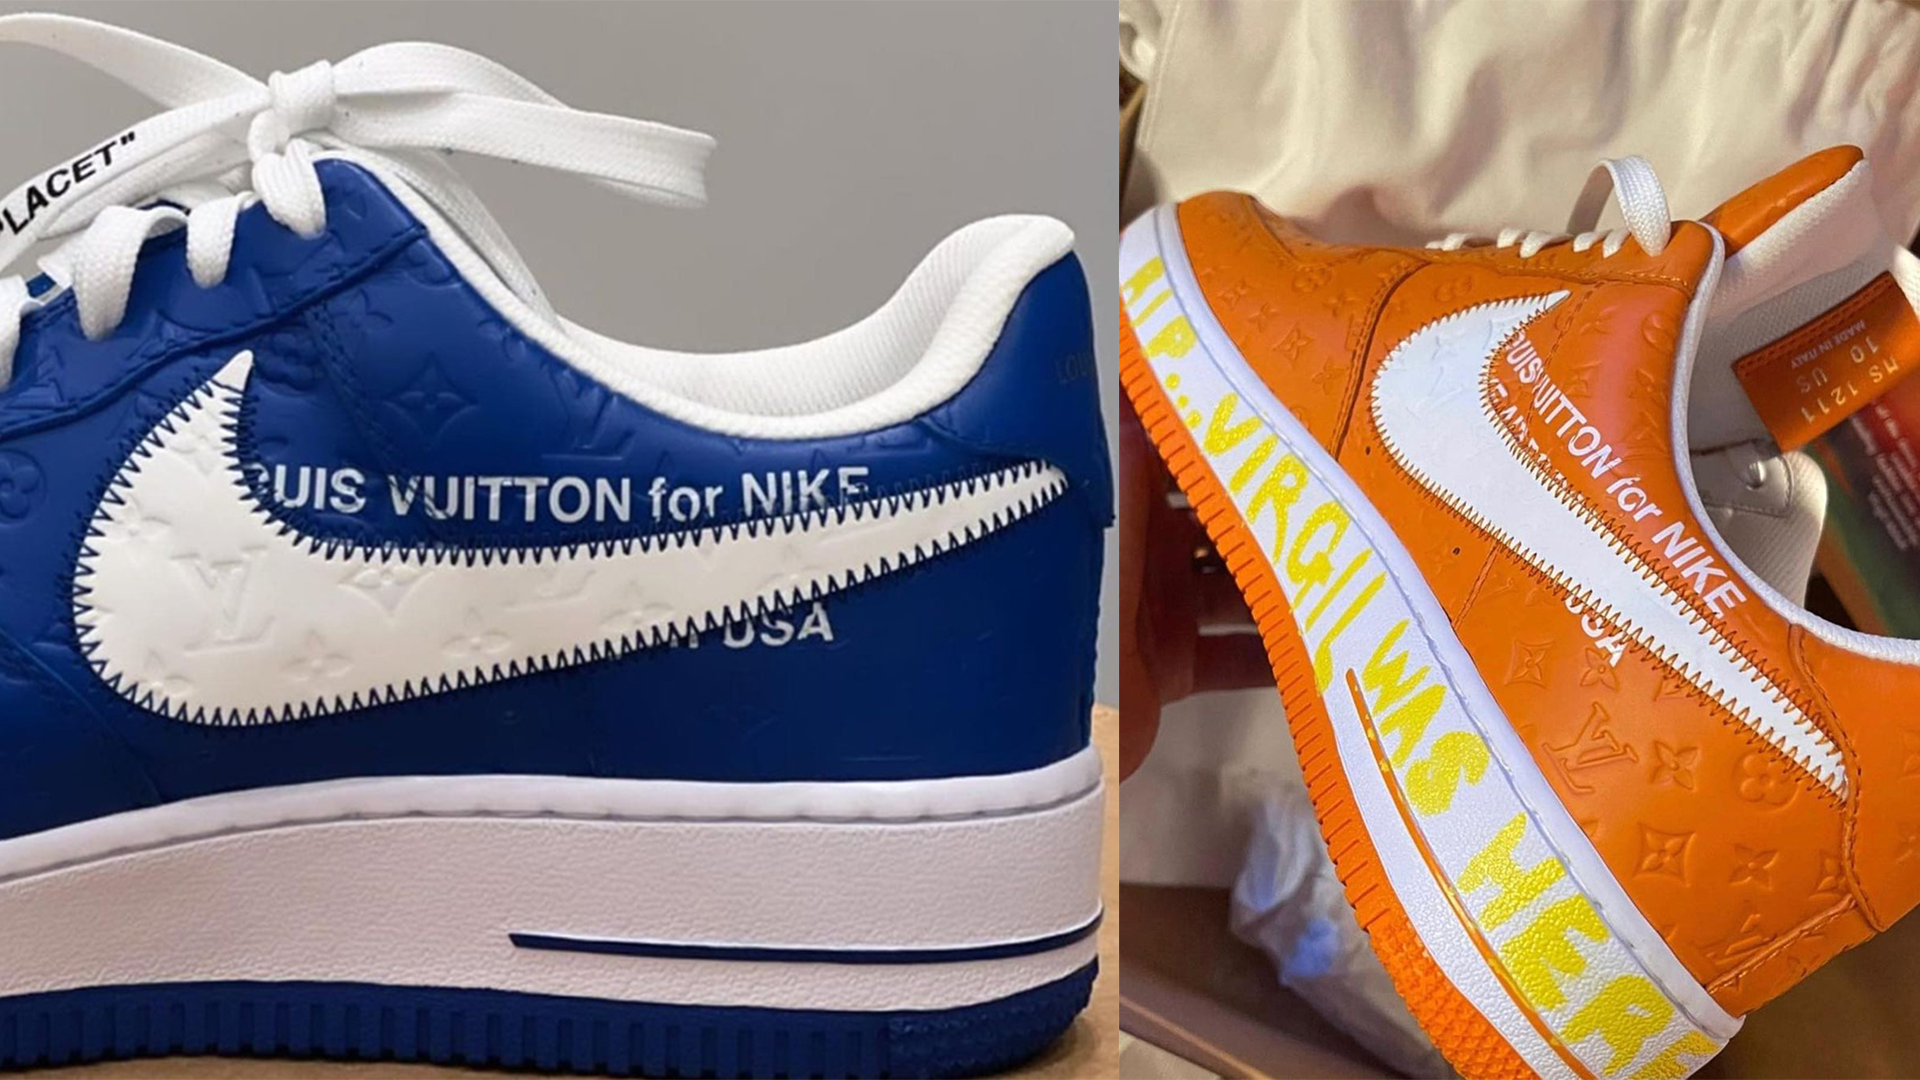 Here's a Closer Look at the Louis Vuitton x Off-White x Nike Air Force 1  Blue and Orange